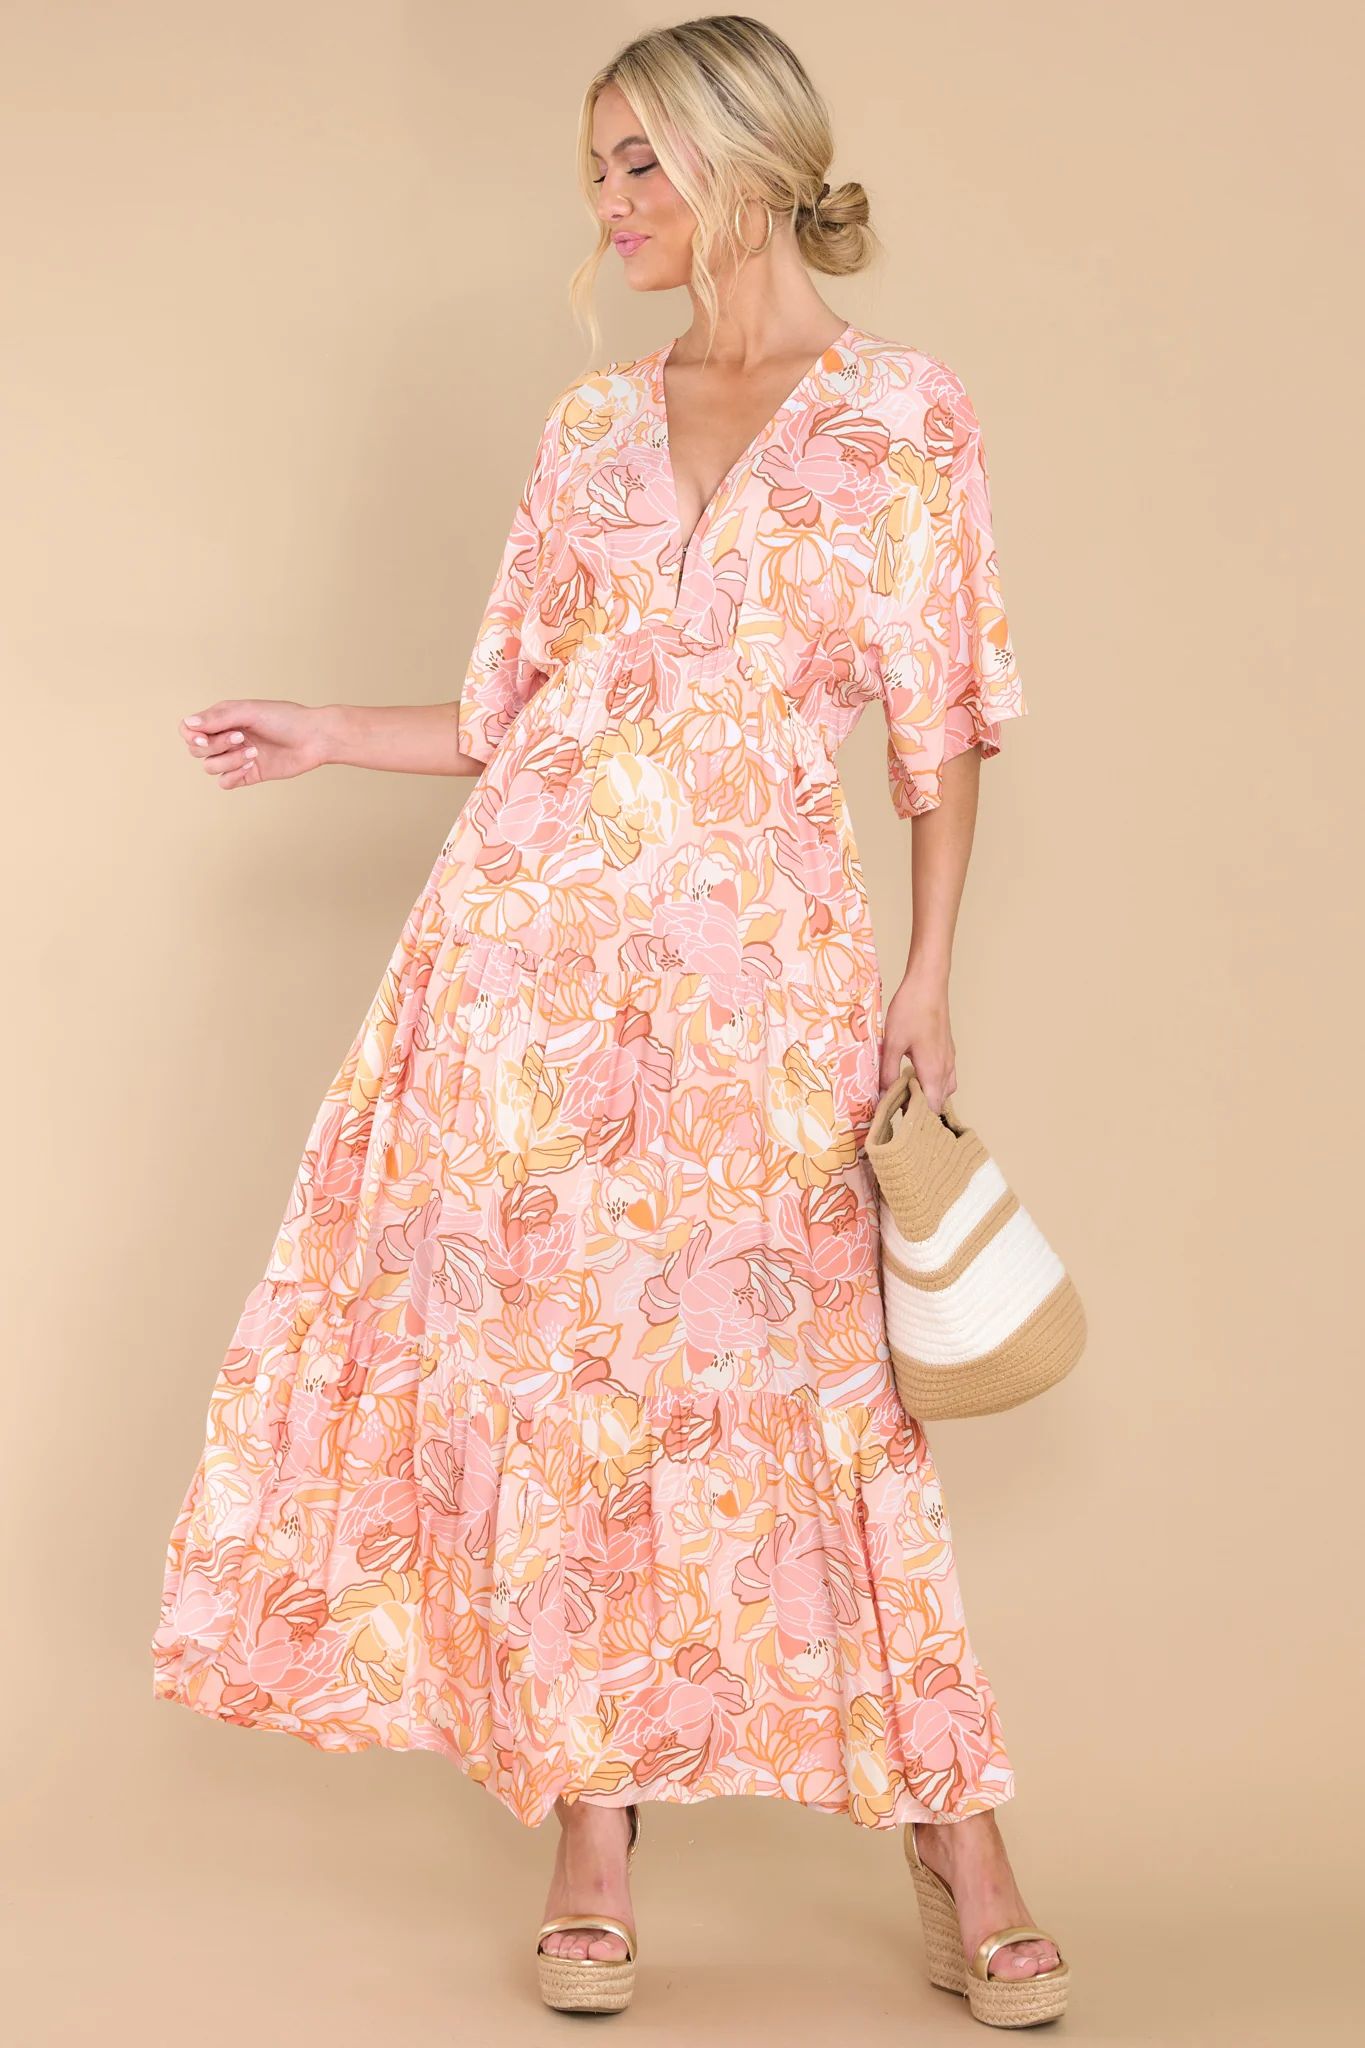 Seaside Style Apricot Floral Print Dress | Red Dress 